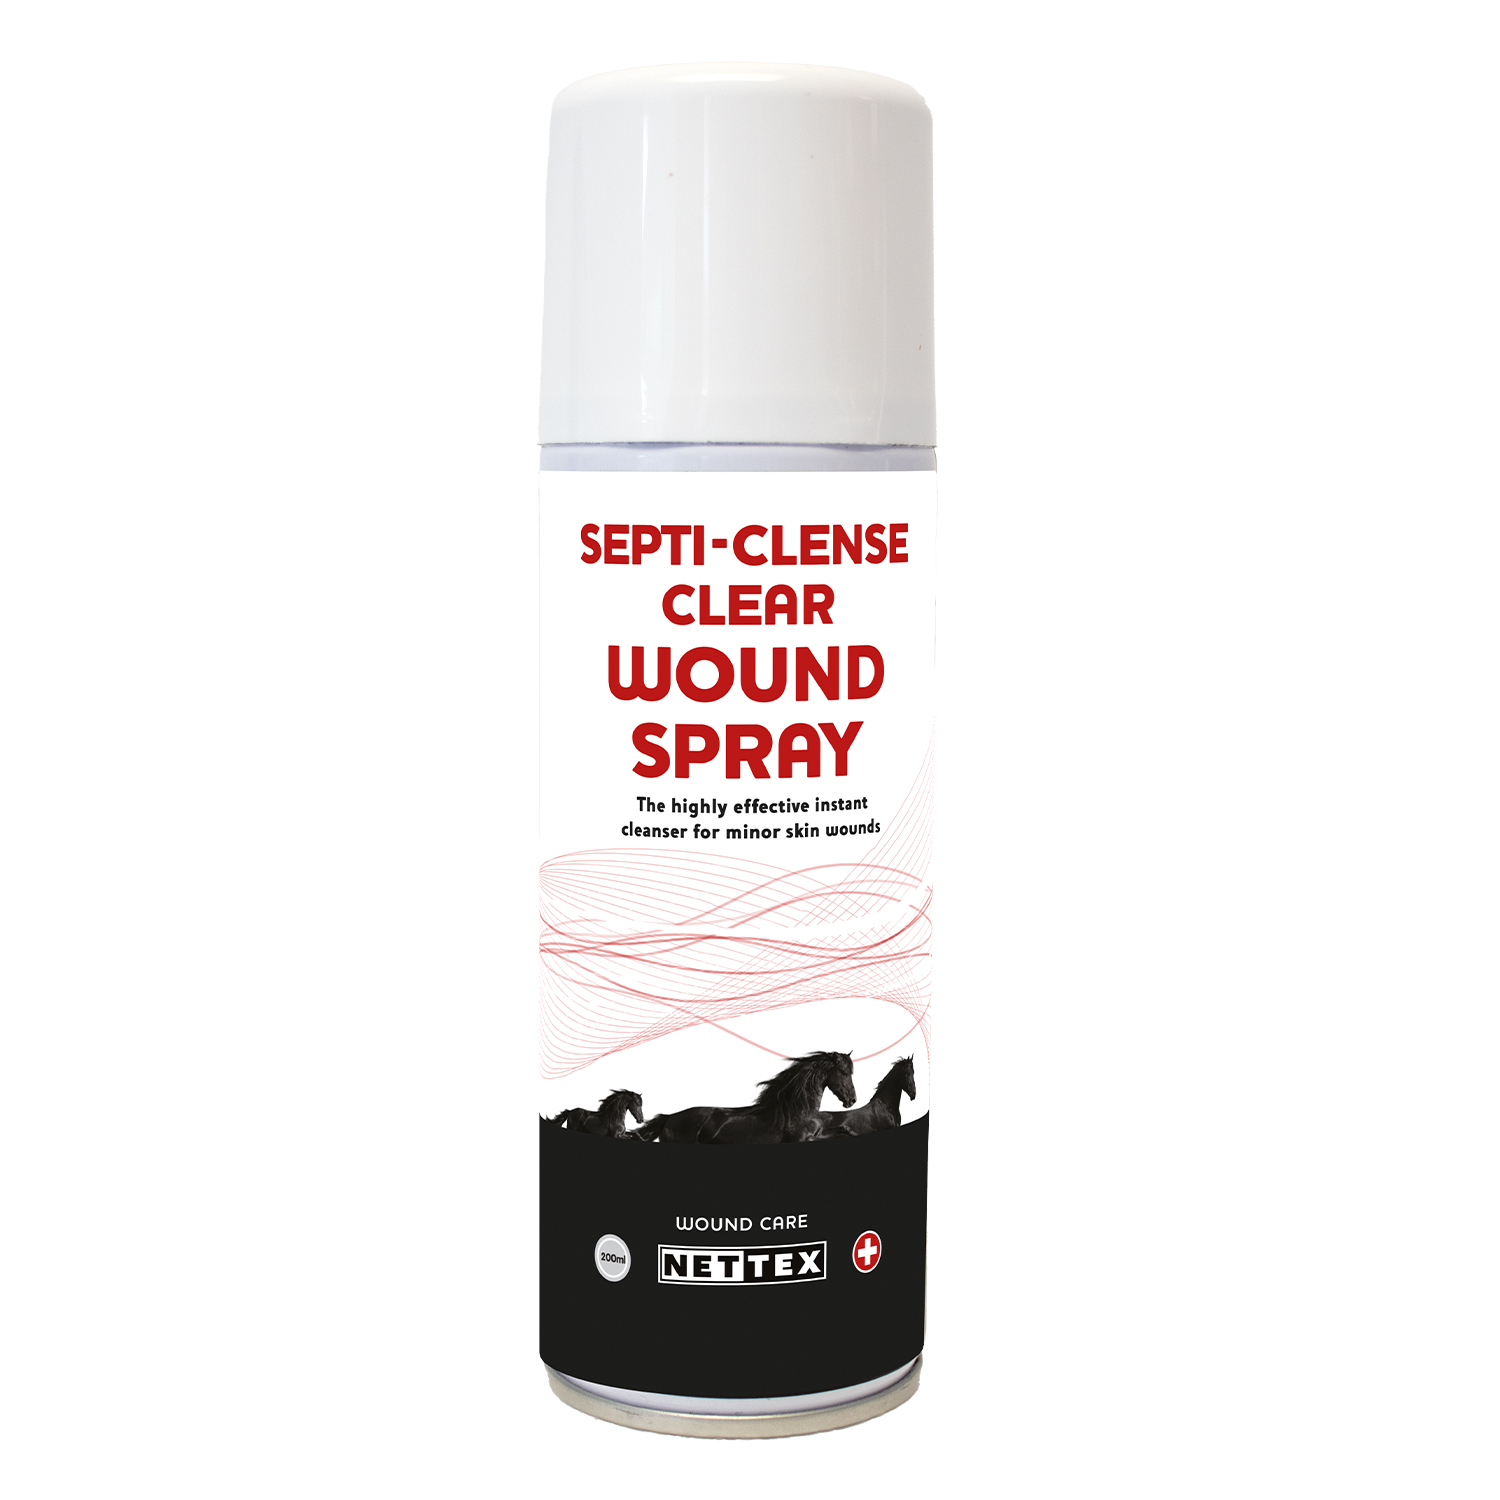 Septi-Cleanse Clear Wound Spray